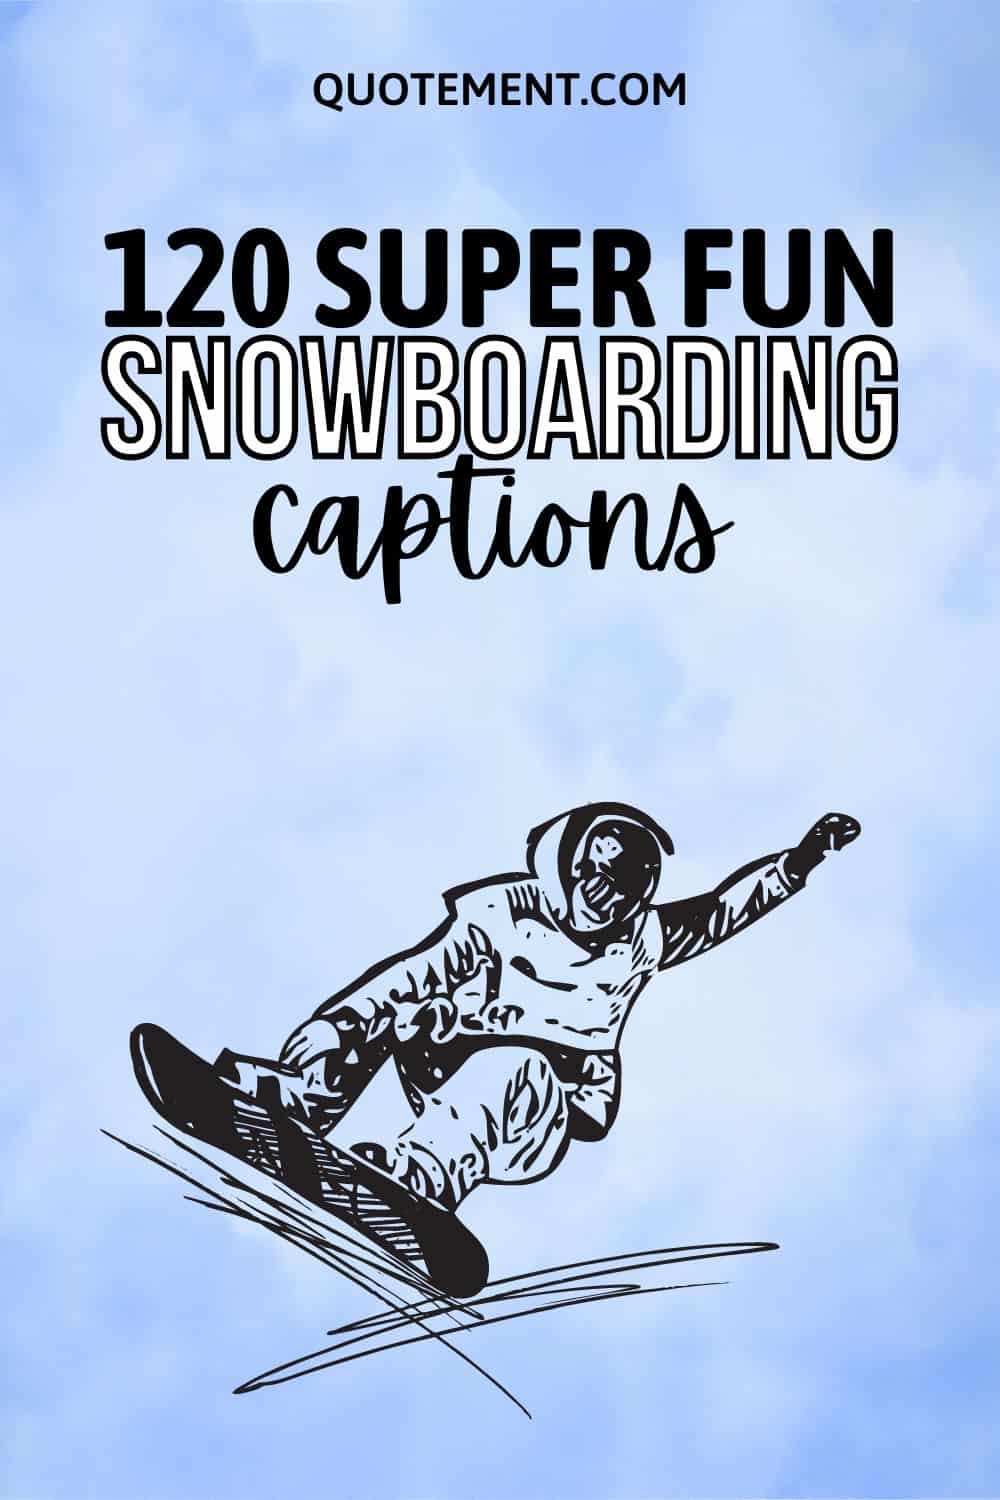 120 Perfect Snowboarding Captions For Your Mountain Fun
